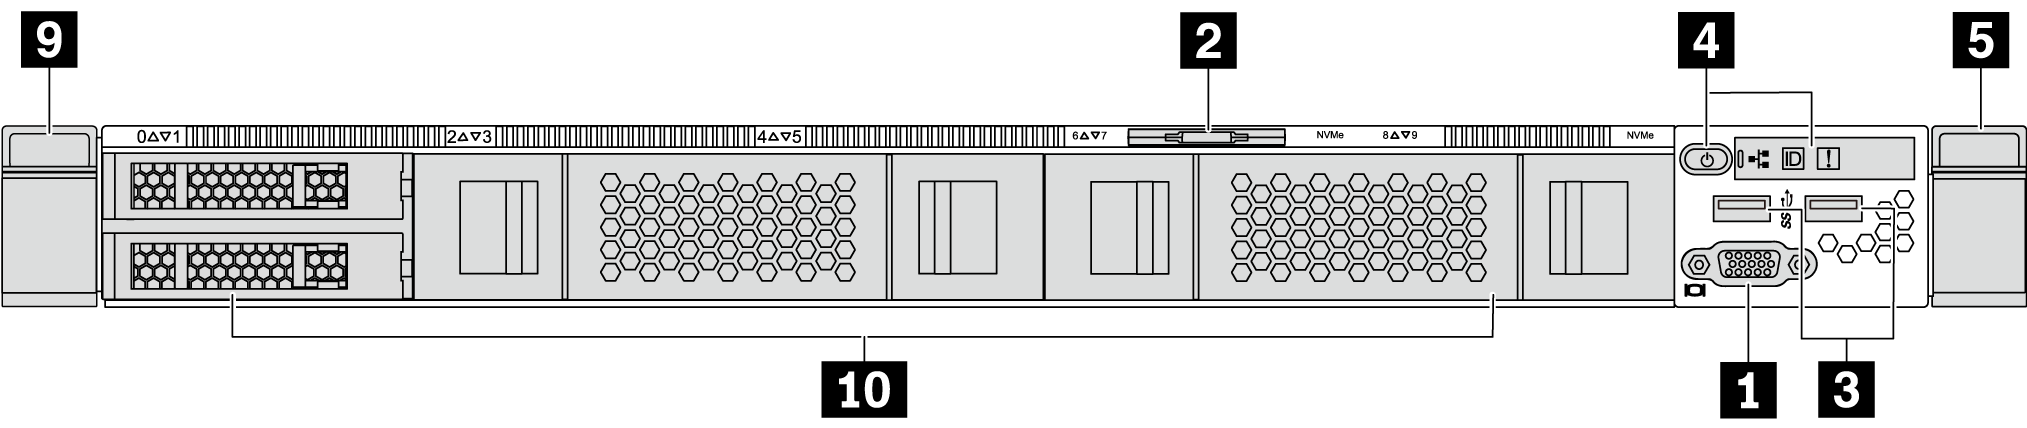 Front view of server model without a backplane (for ten 2.5-inch drive bays)